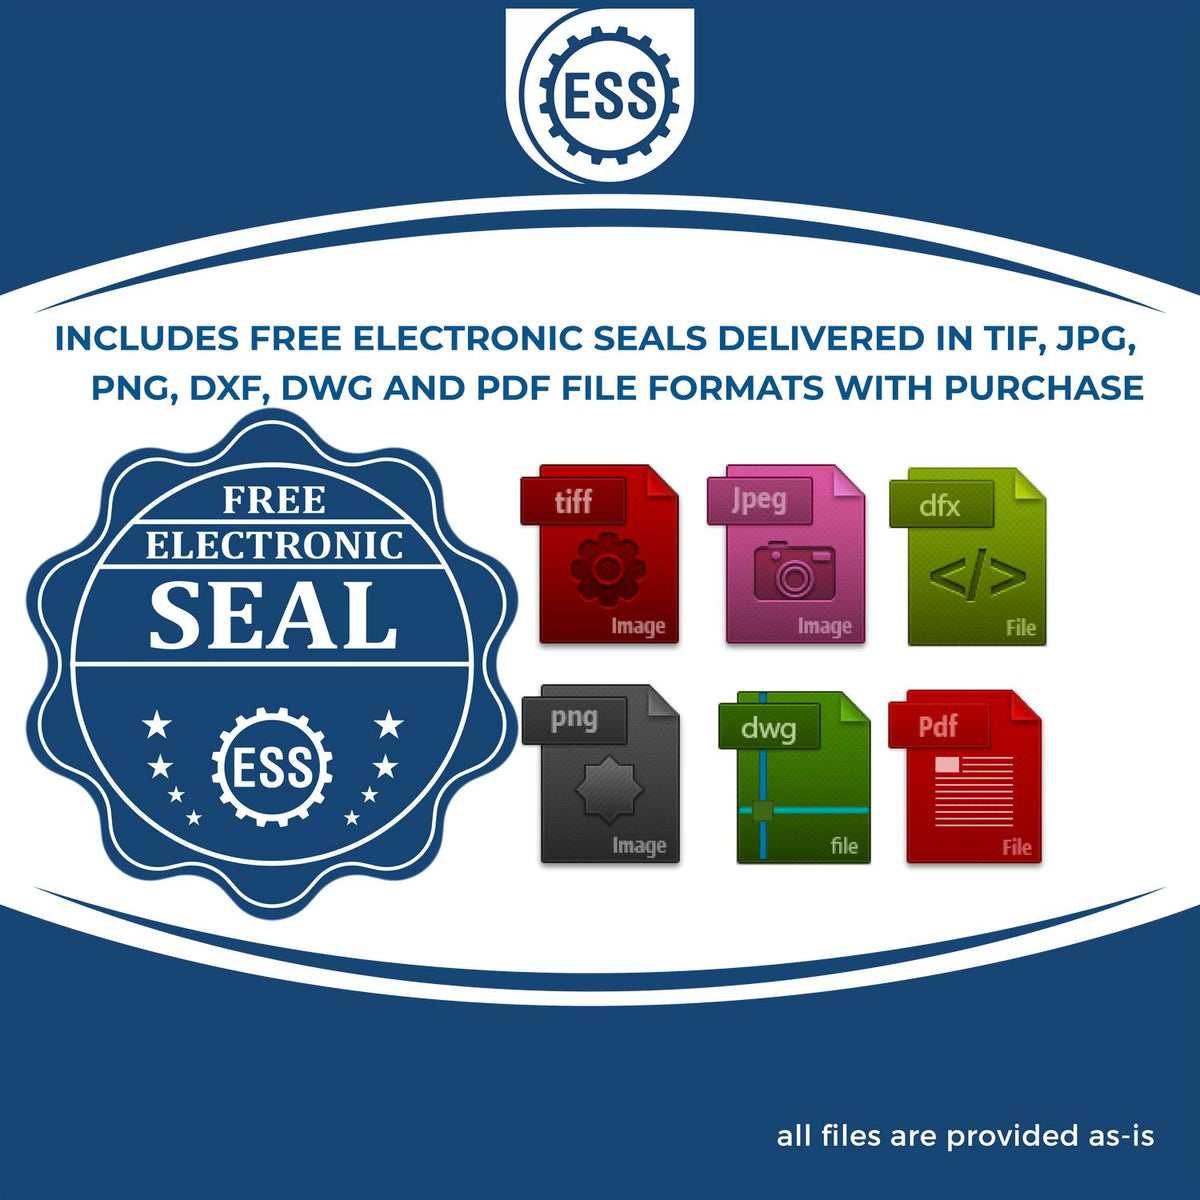 An infographic for the free electronic seal for the South Dakota Geologist Desk Seal illustrating the different file type icons such as DXF, DWG, TIF, JPG and PNG.